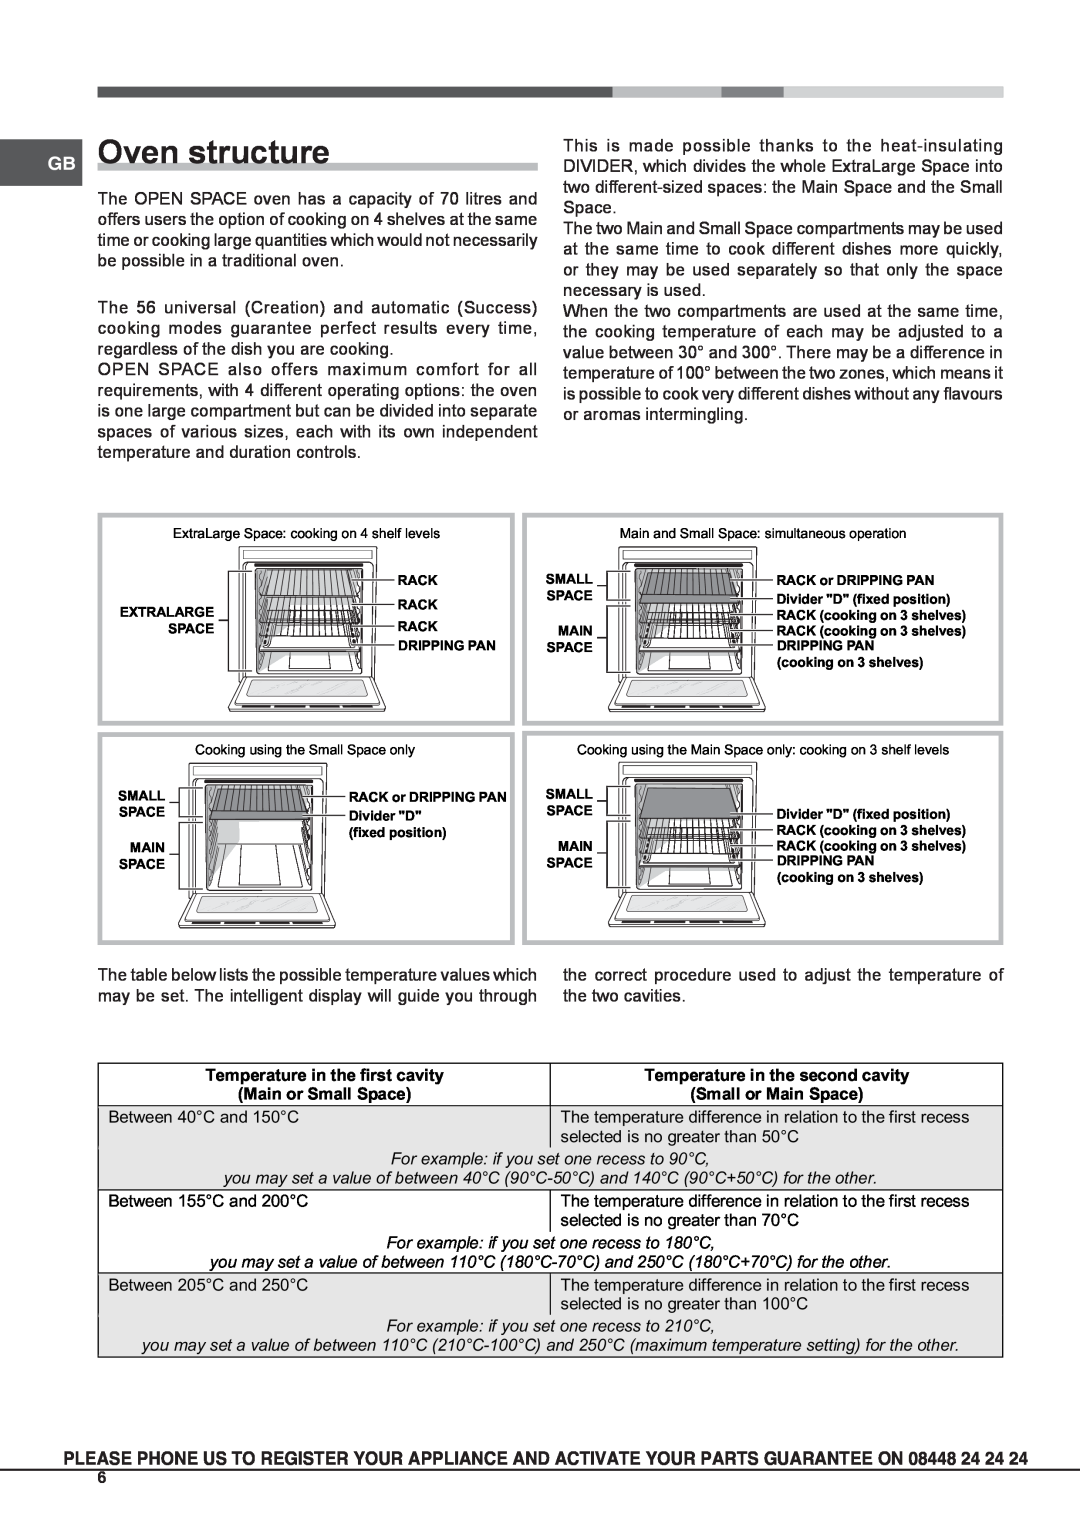 Hotpoint osx 1036n dcx s manual GB Oven structure, Temperature in the first cavity, Temperature in the second cavity 